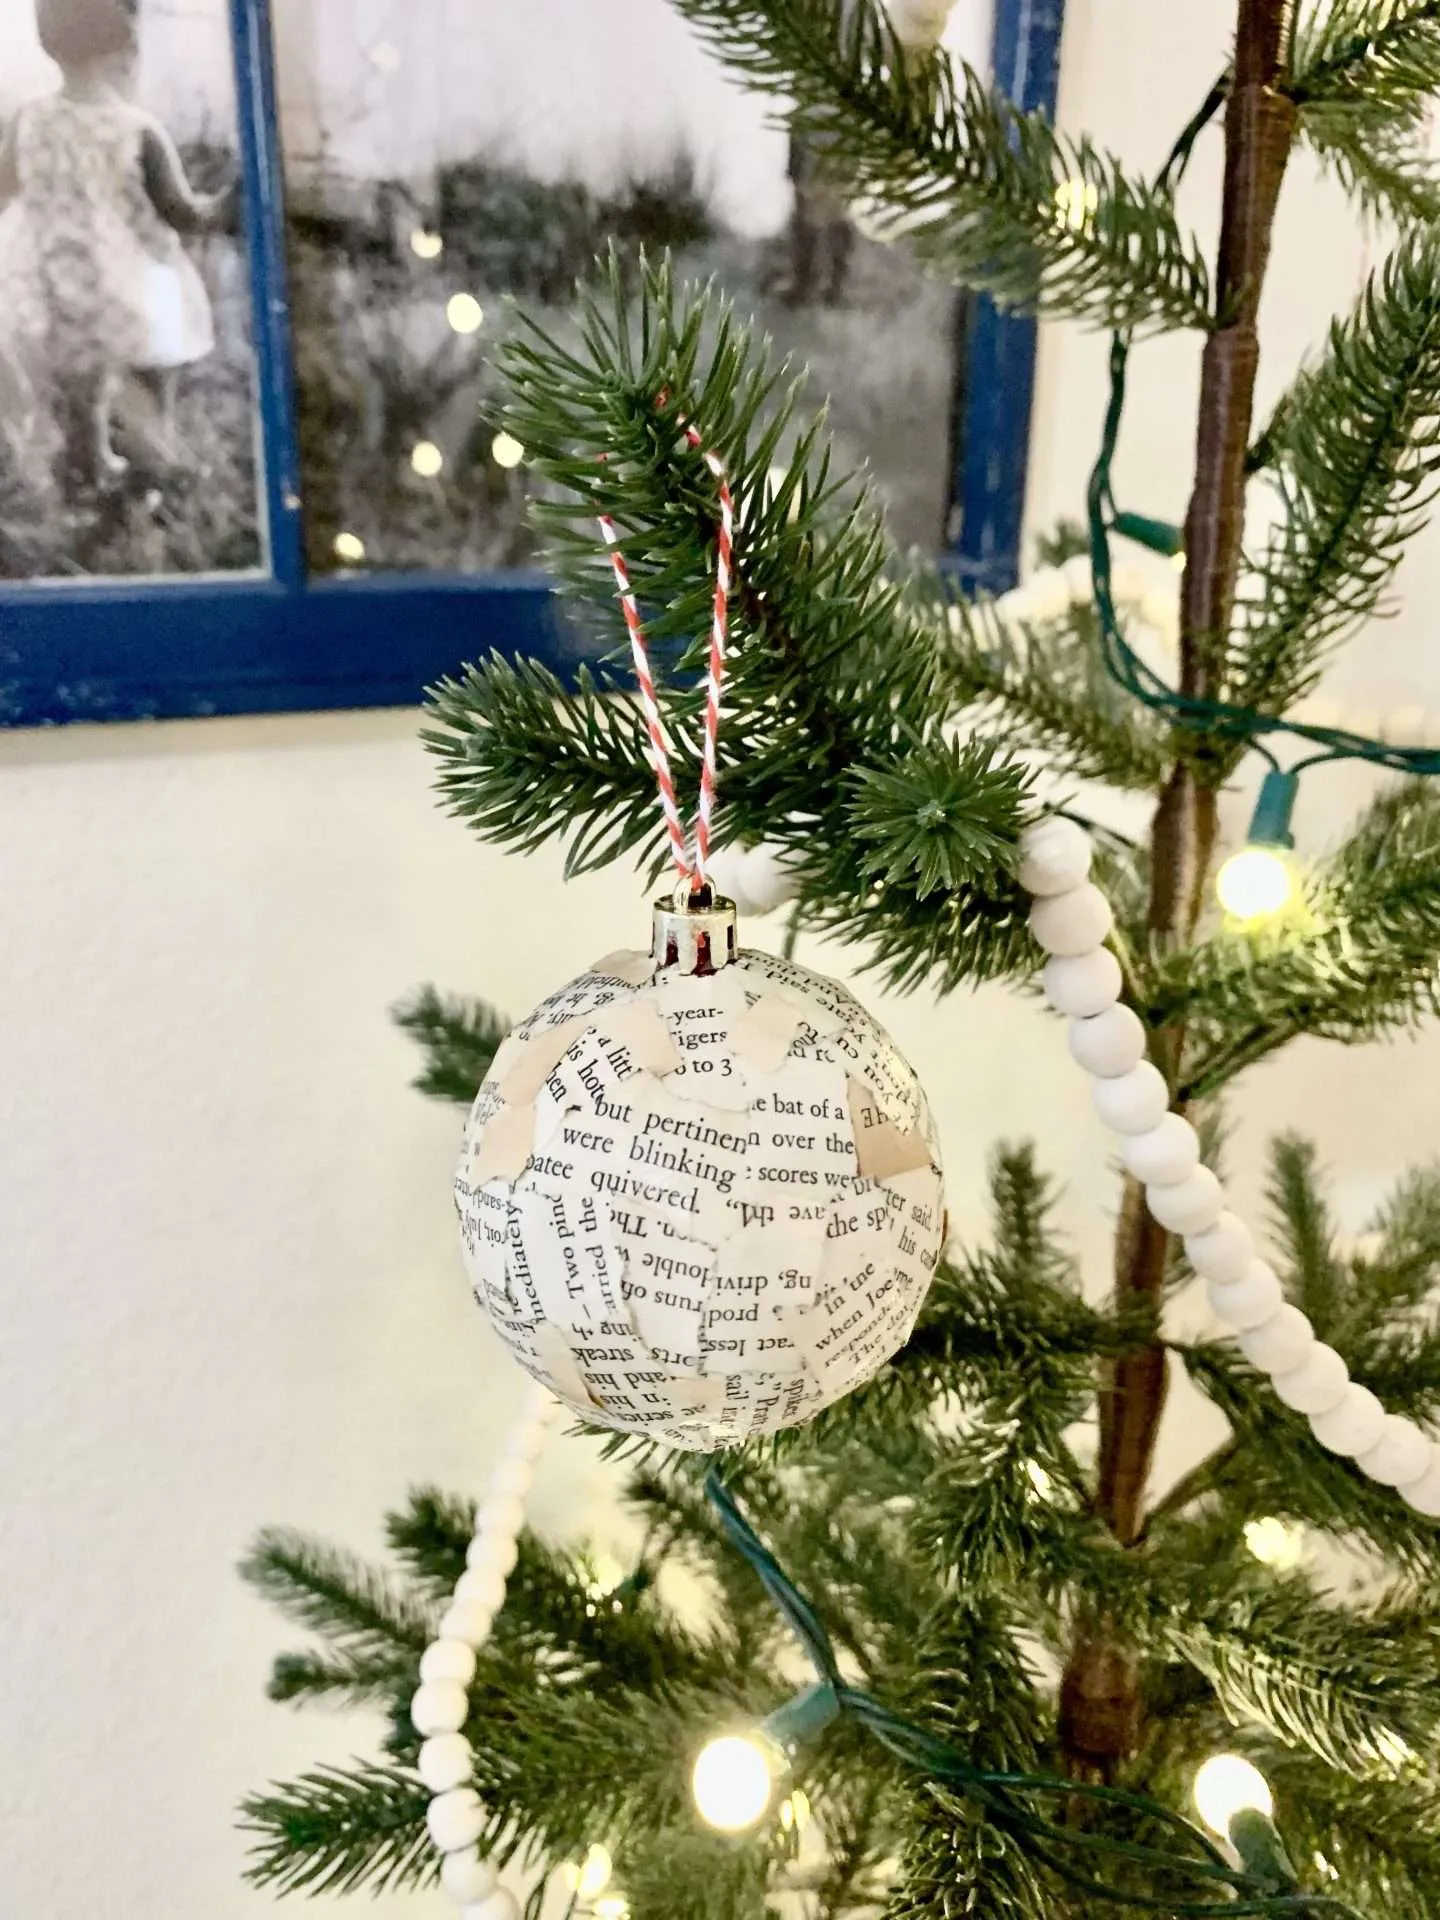 Classic Christmas balls with a vintage paper twist!